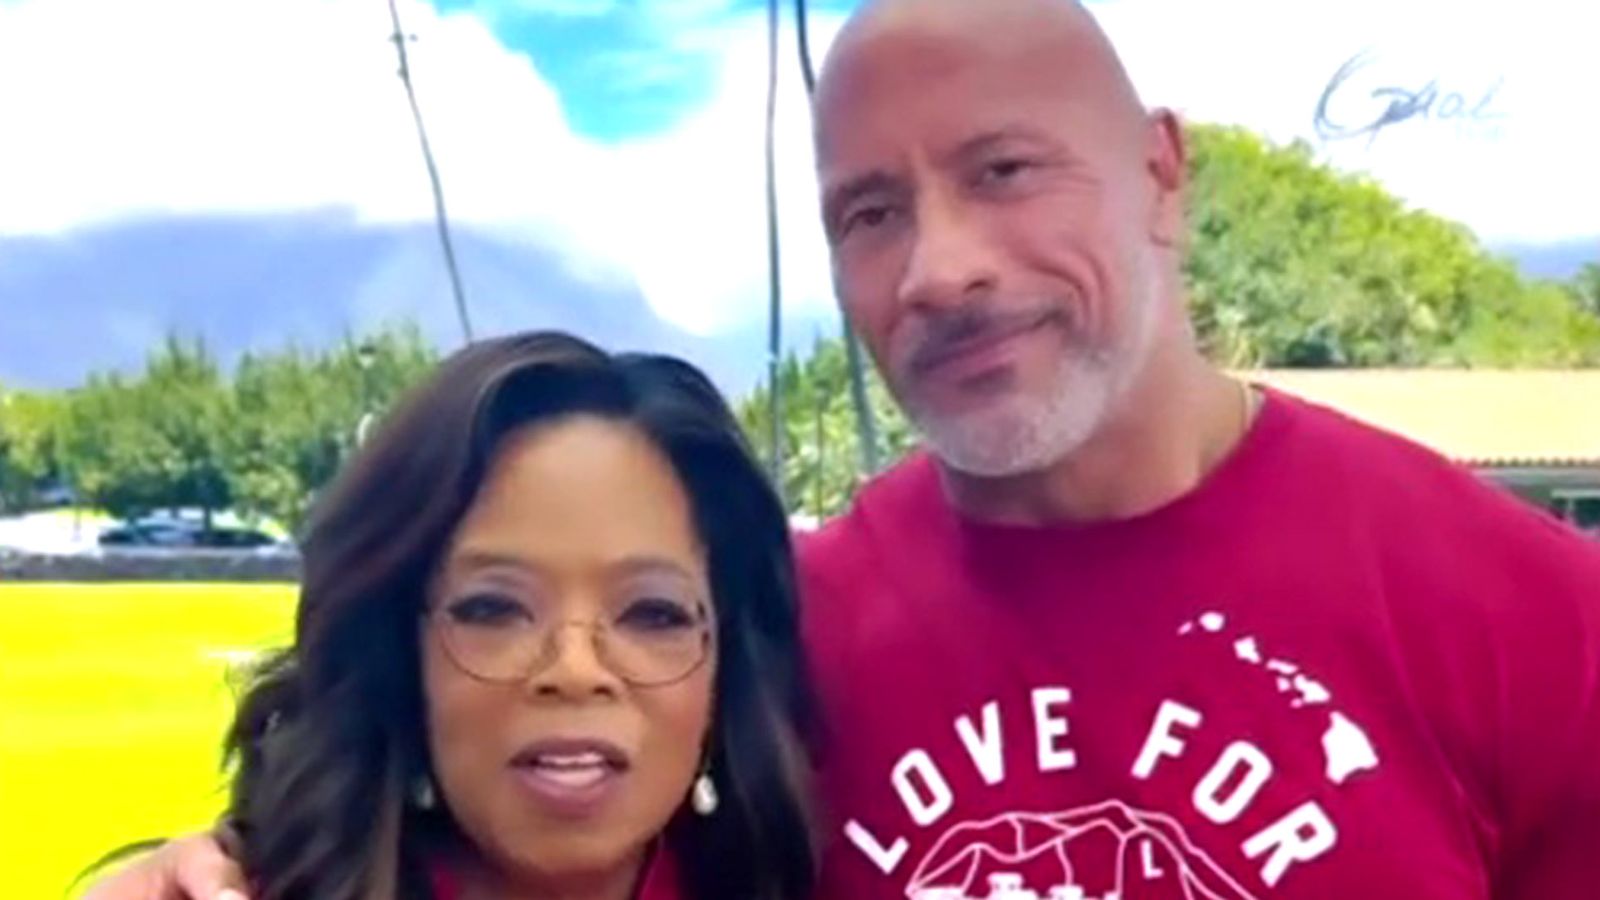 Oprah Winfrey and Dwayne Johnson create Maui relief fund after Hawaii wildfires and kick it off with $10m | Ents & Arts News